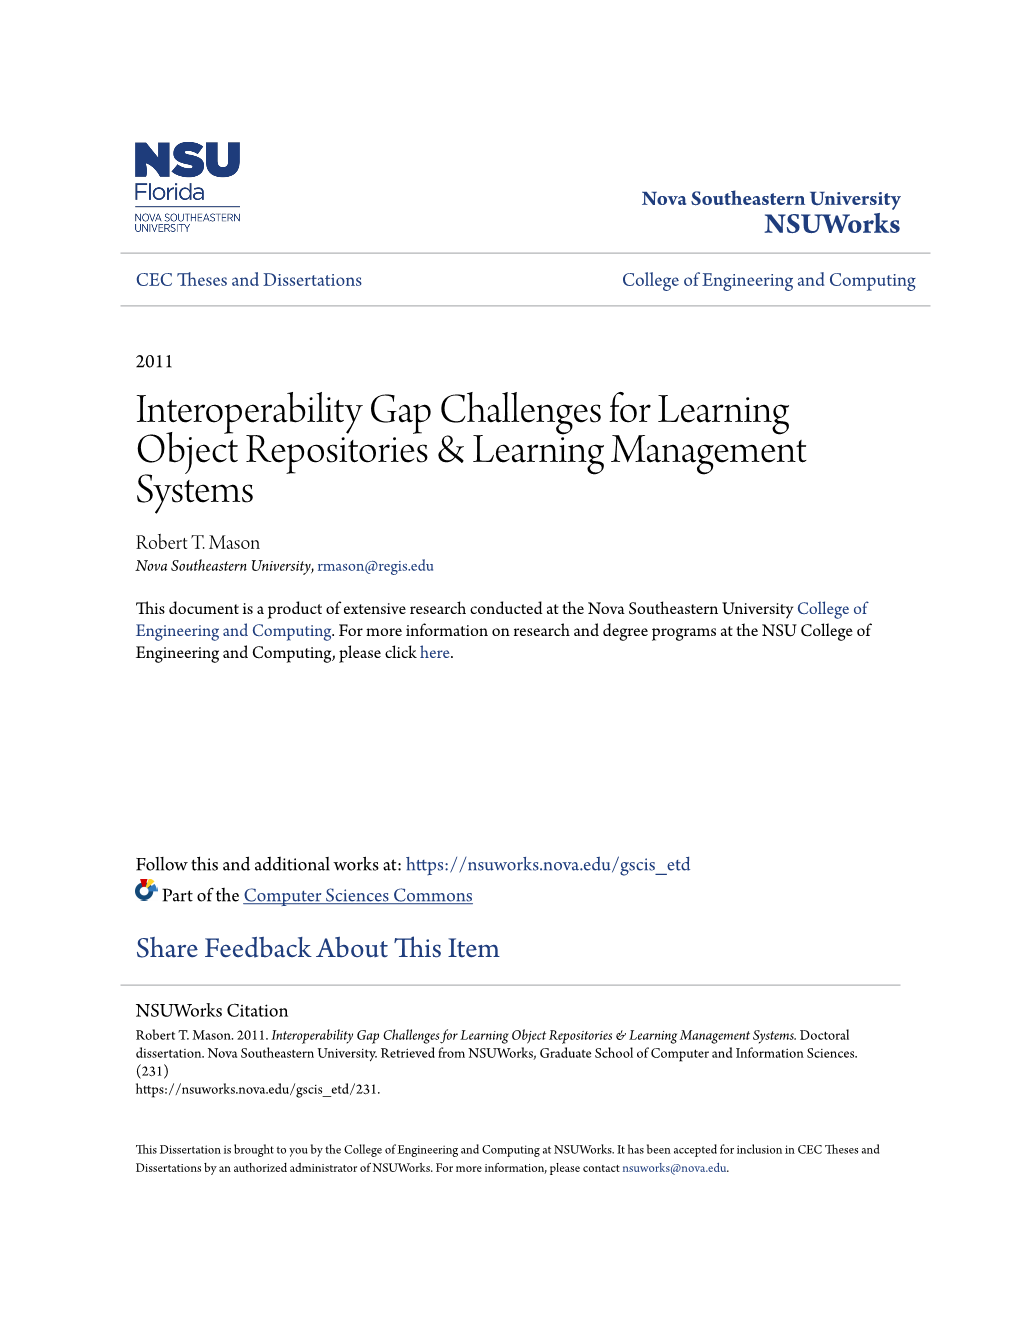 Interoperability Gap Challenges for Learning Object Repositories & Learning Management Systems Robert T